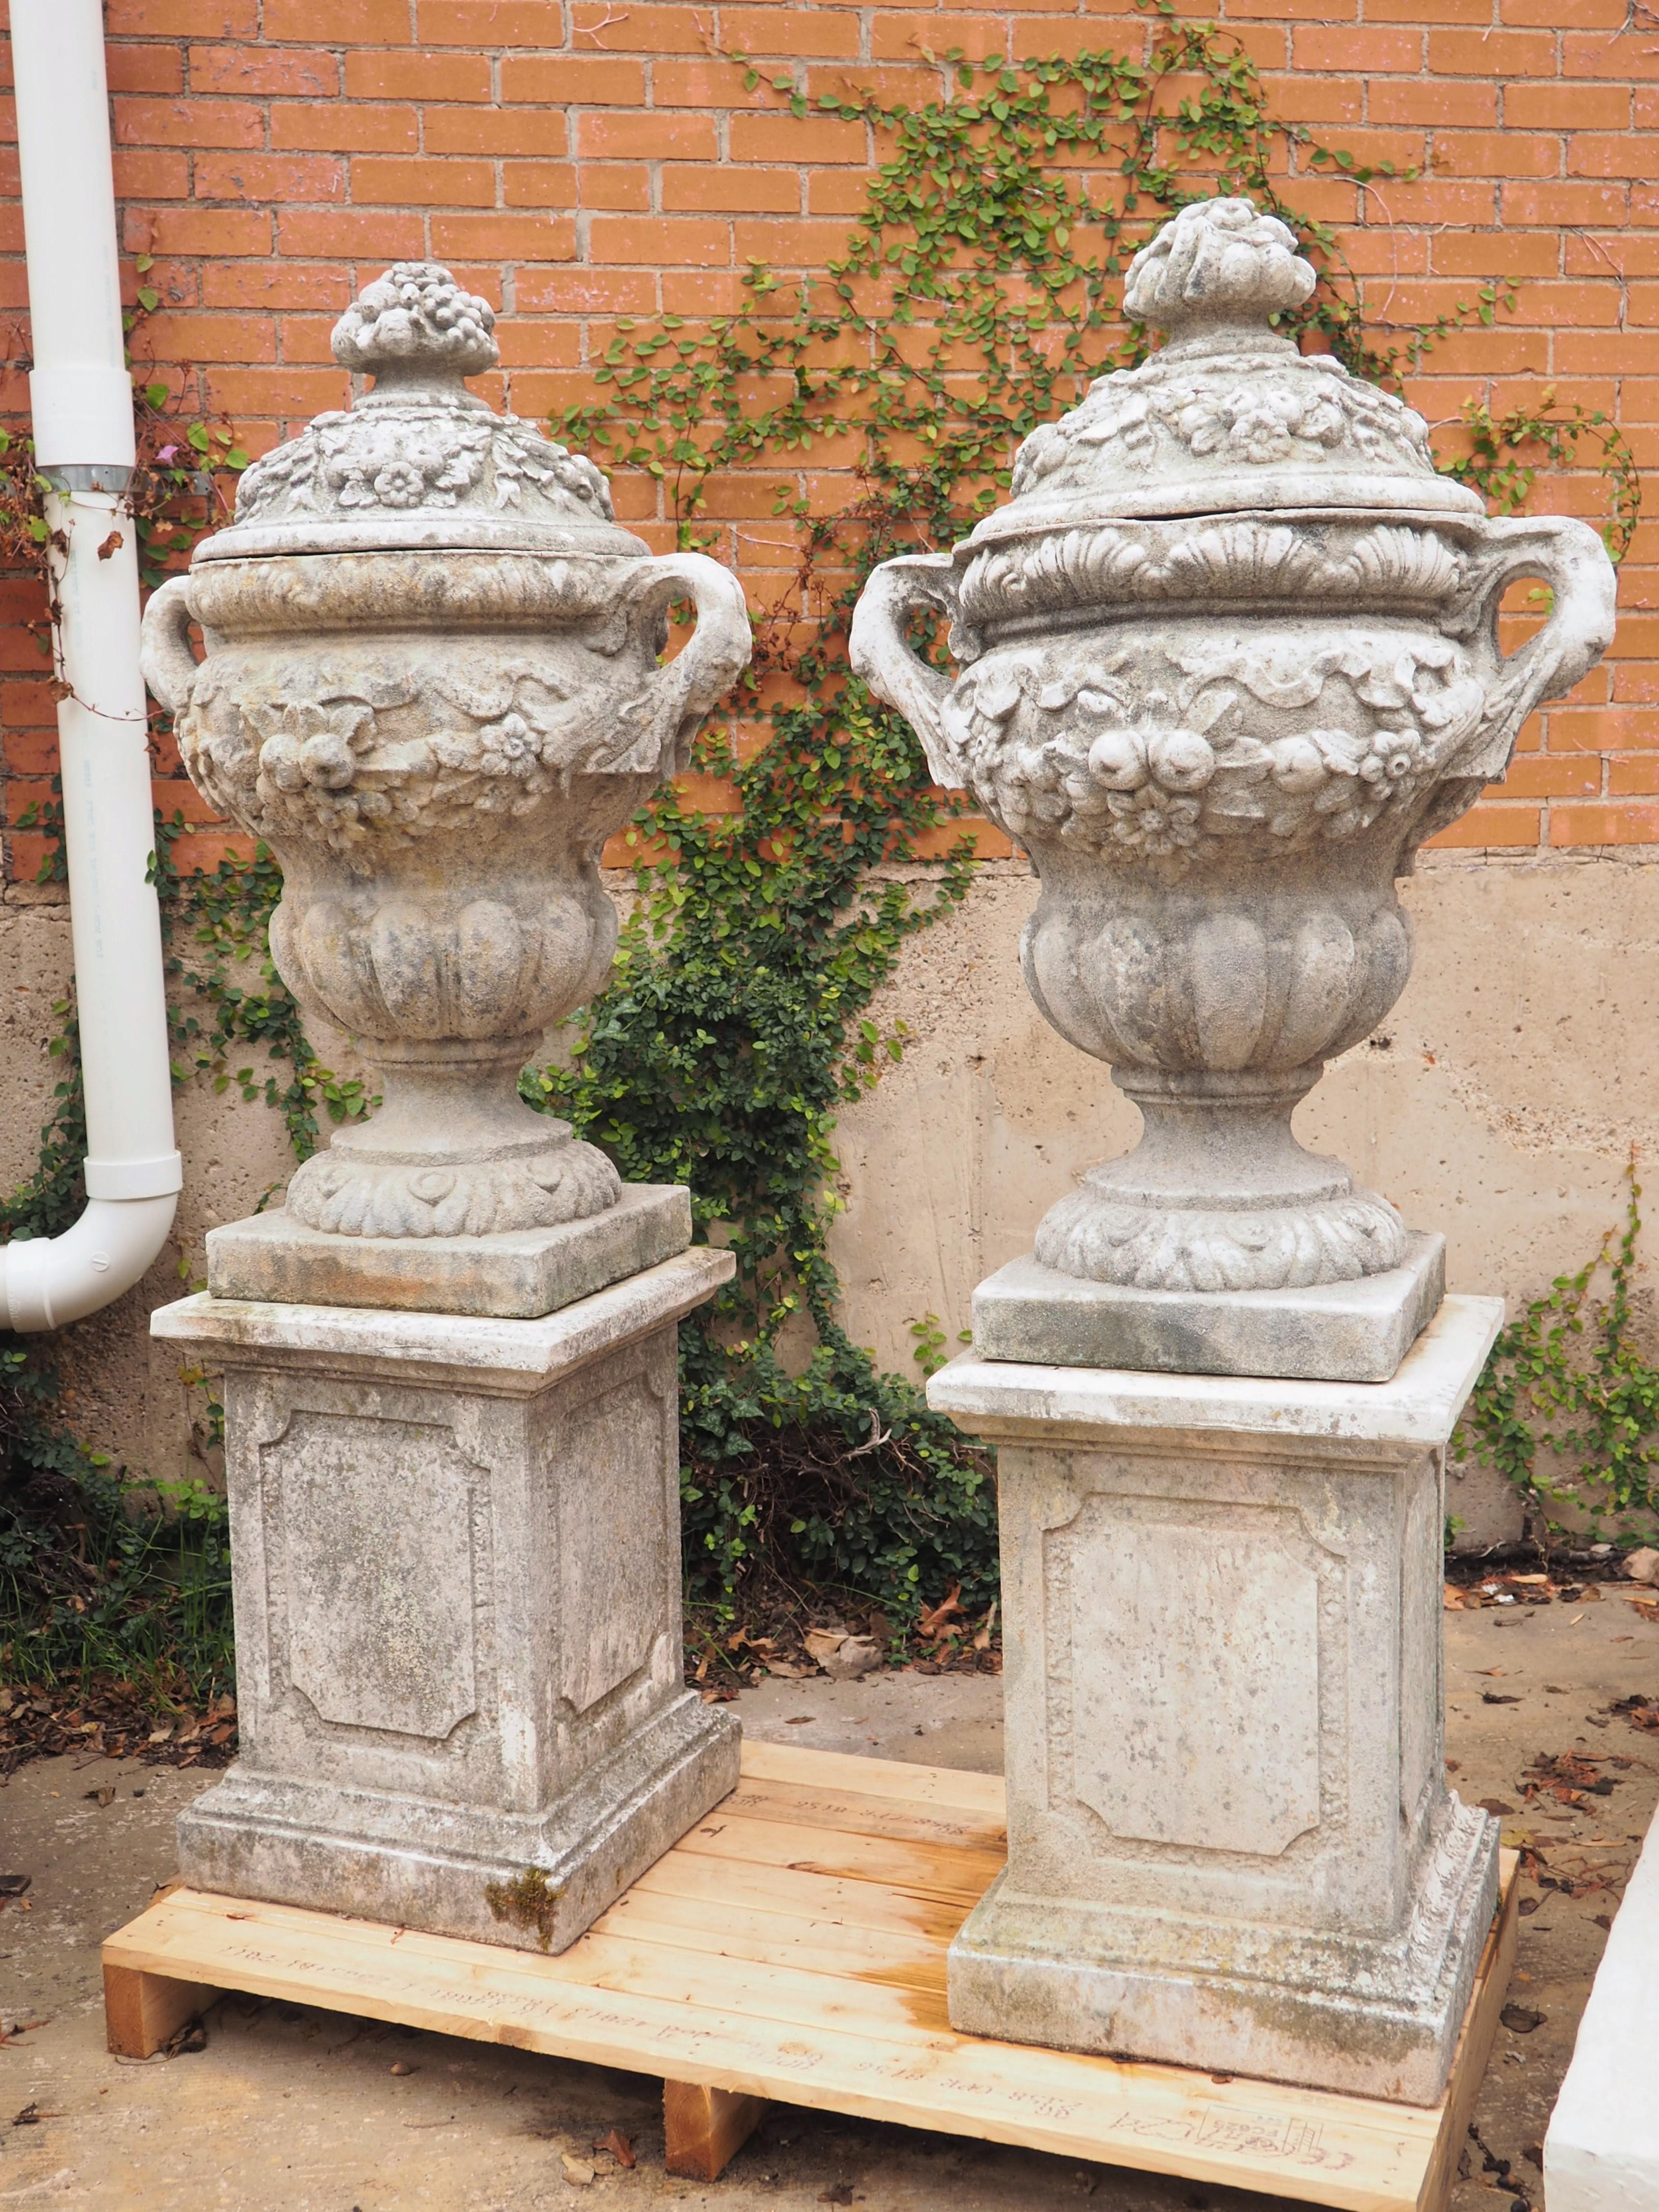 These regal French lidded garden vases rest on a classical, one-piece plinth with a molded entablature. As they have been resting in Normandy for the past 10 years, they have developed a natural gray/brown patina with traces of moss. The lids